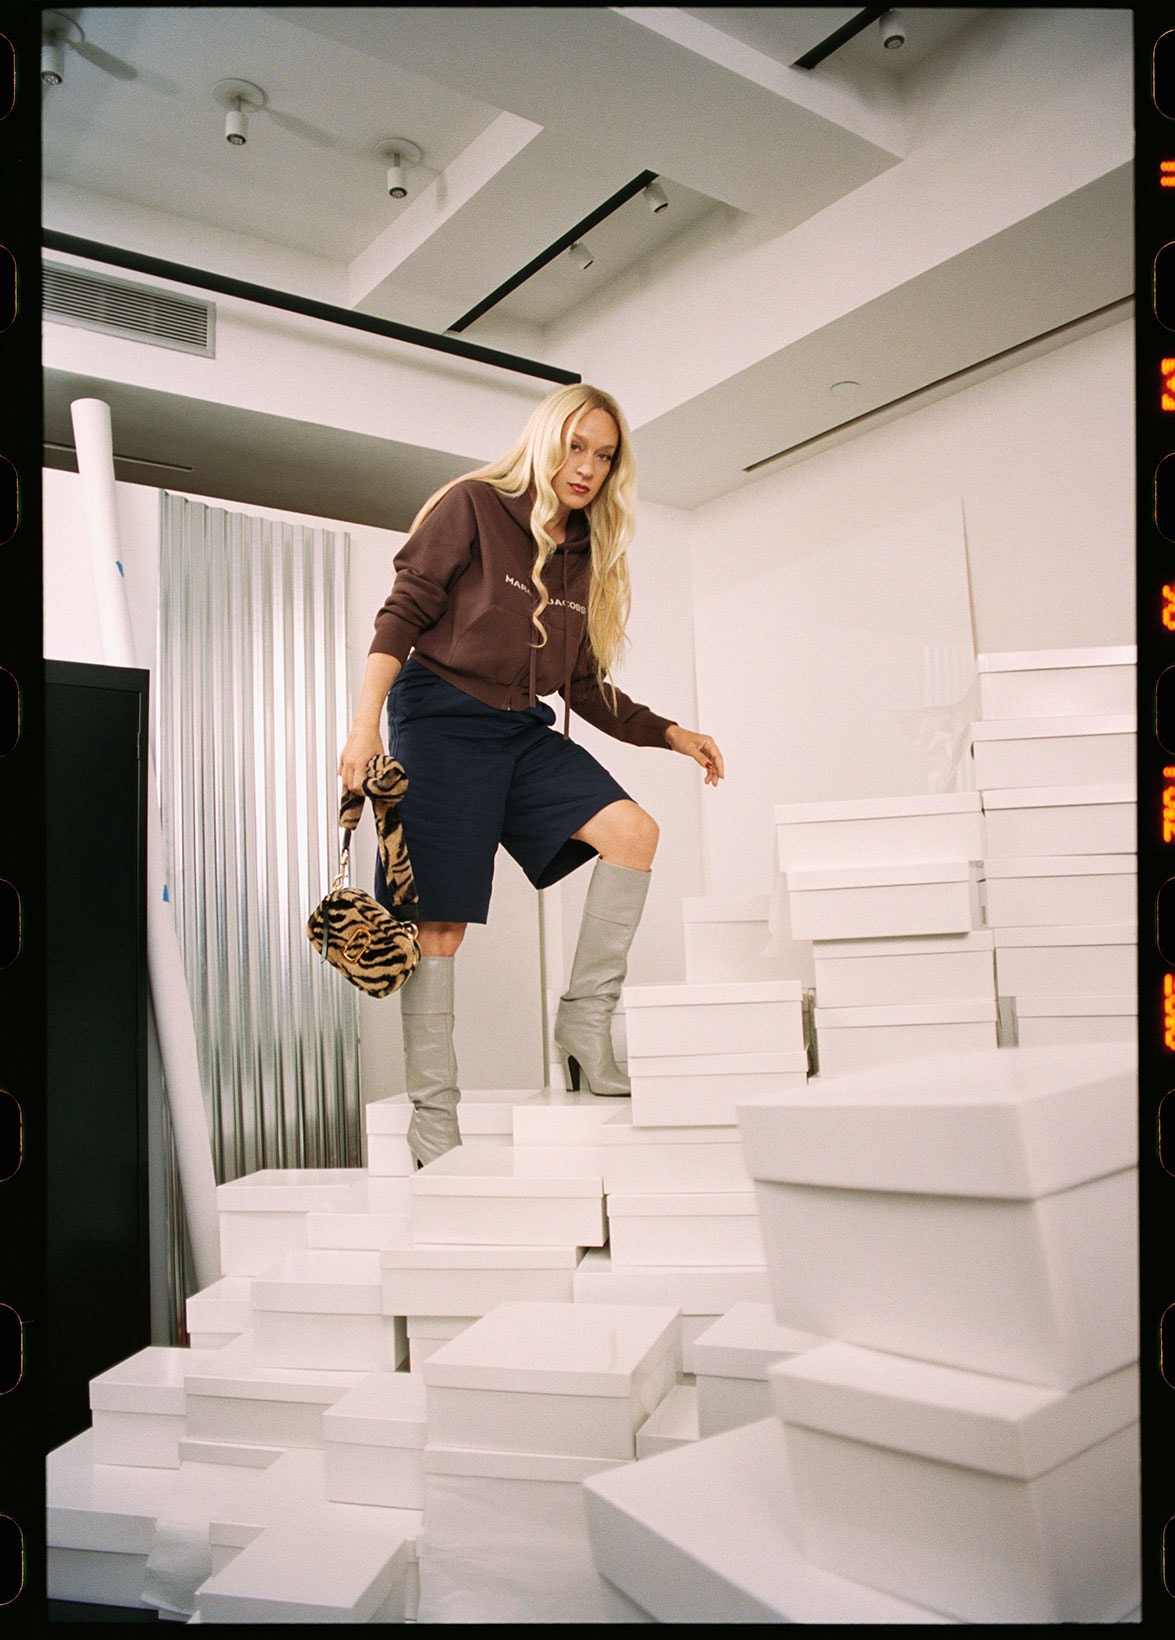 Marc Jacobs Chloë Sevigny Resort Campaign NYC Headquarters Office Boxes